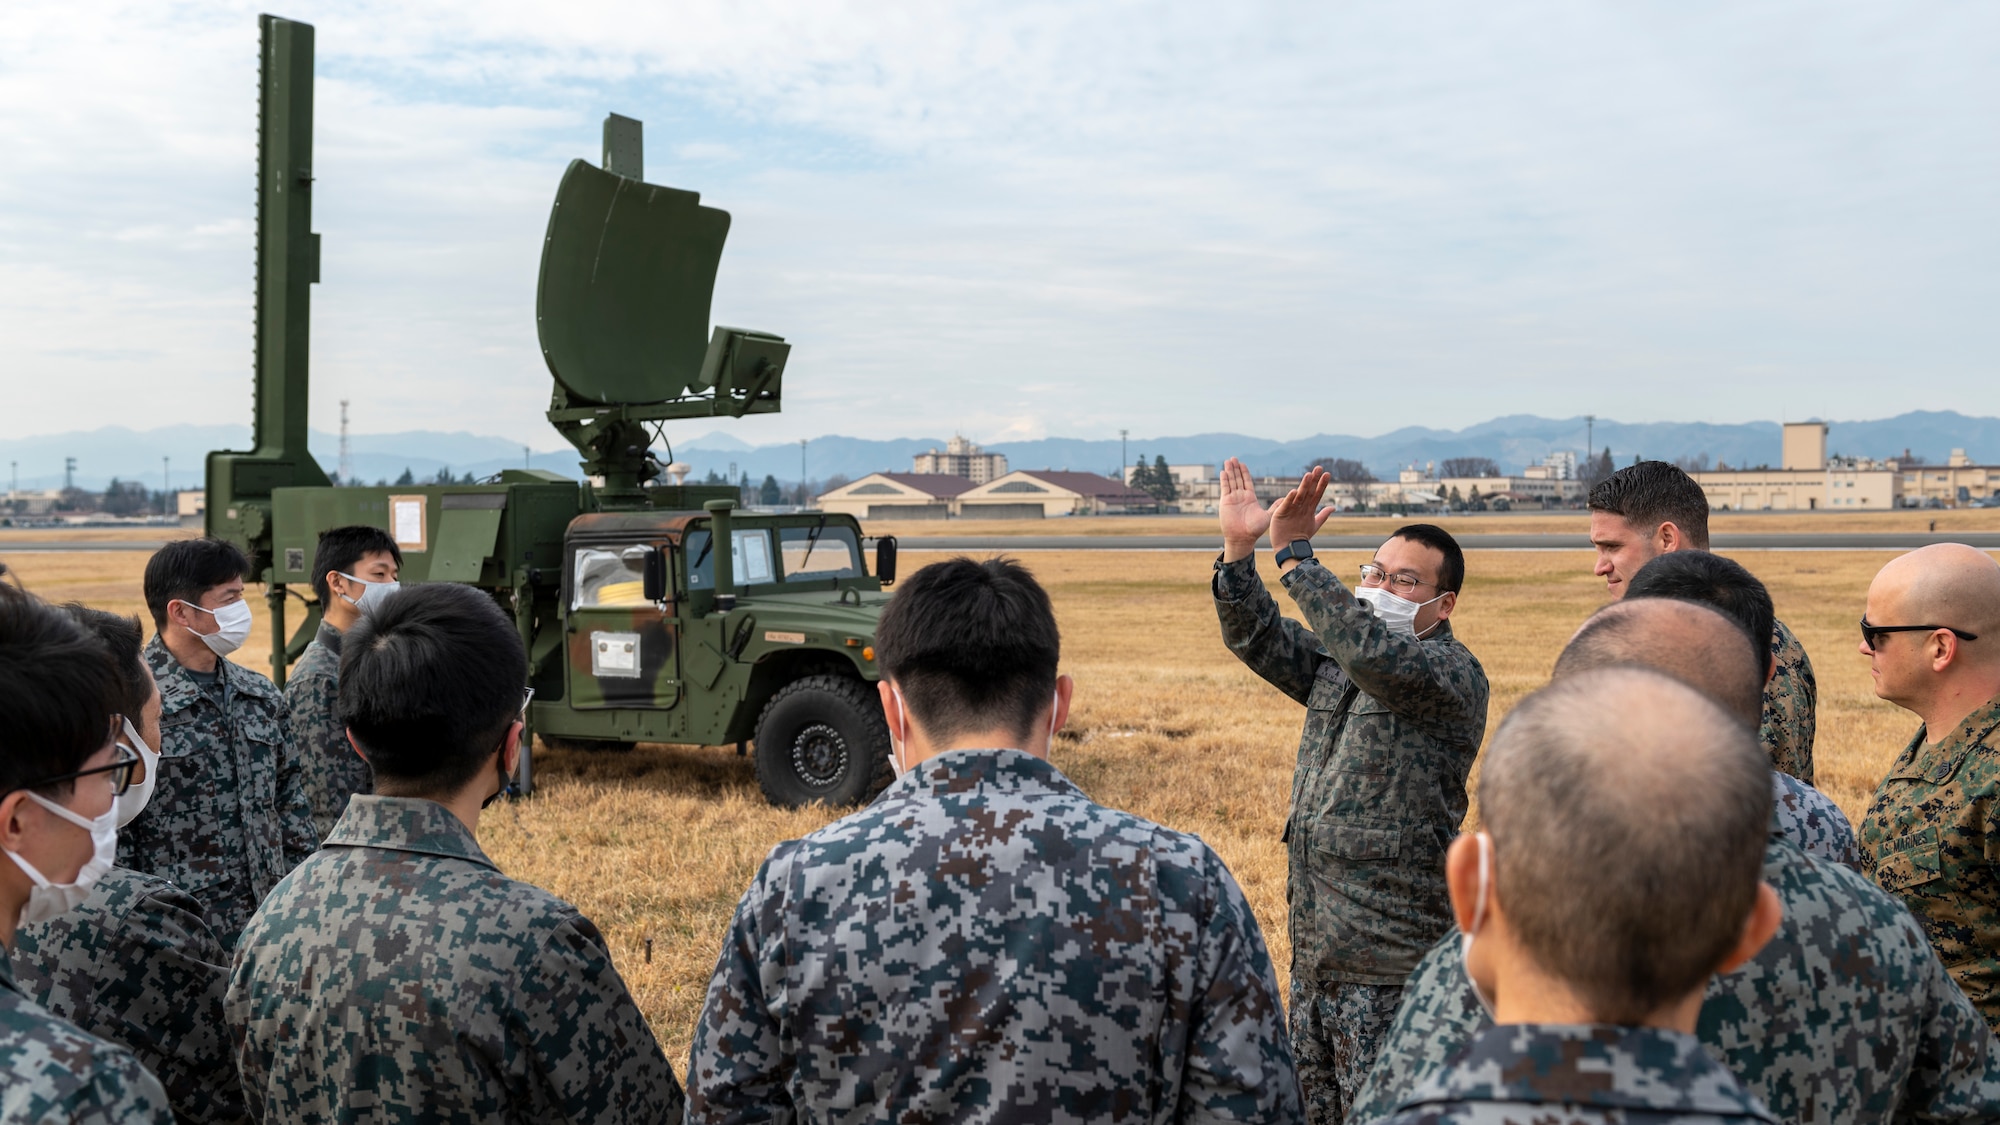 Japanese air force members crowd around a military jeep with a radar dish on top